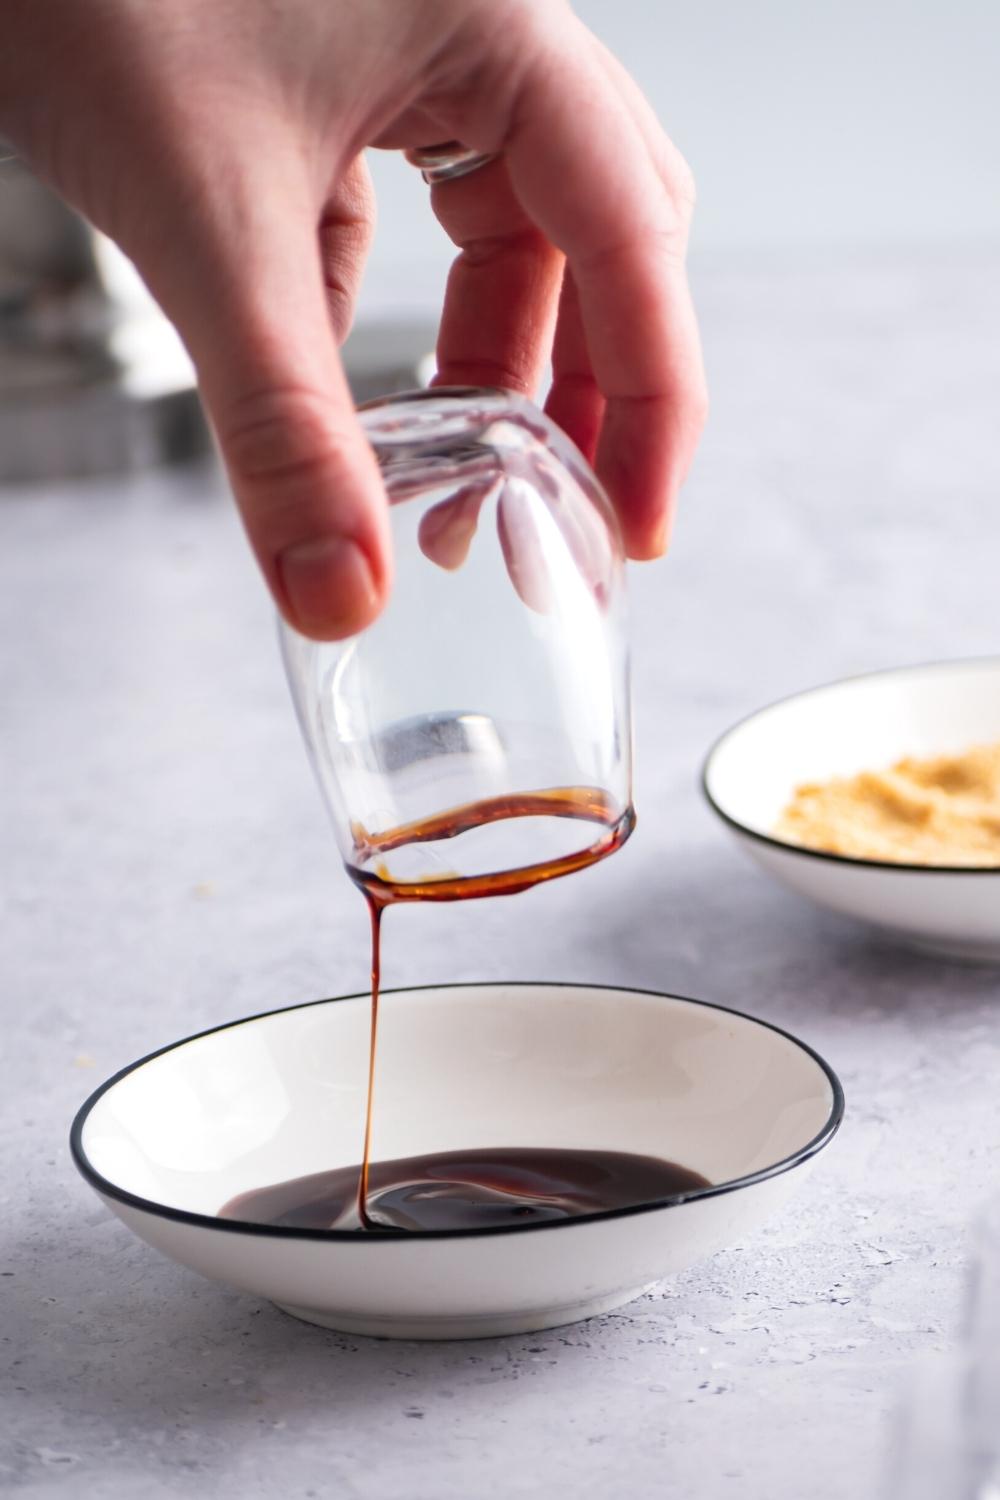 A hand holding a shot glass upside down with caramel sauce on the rim dripping down into a bowl that is filled with the caramel sauce.